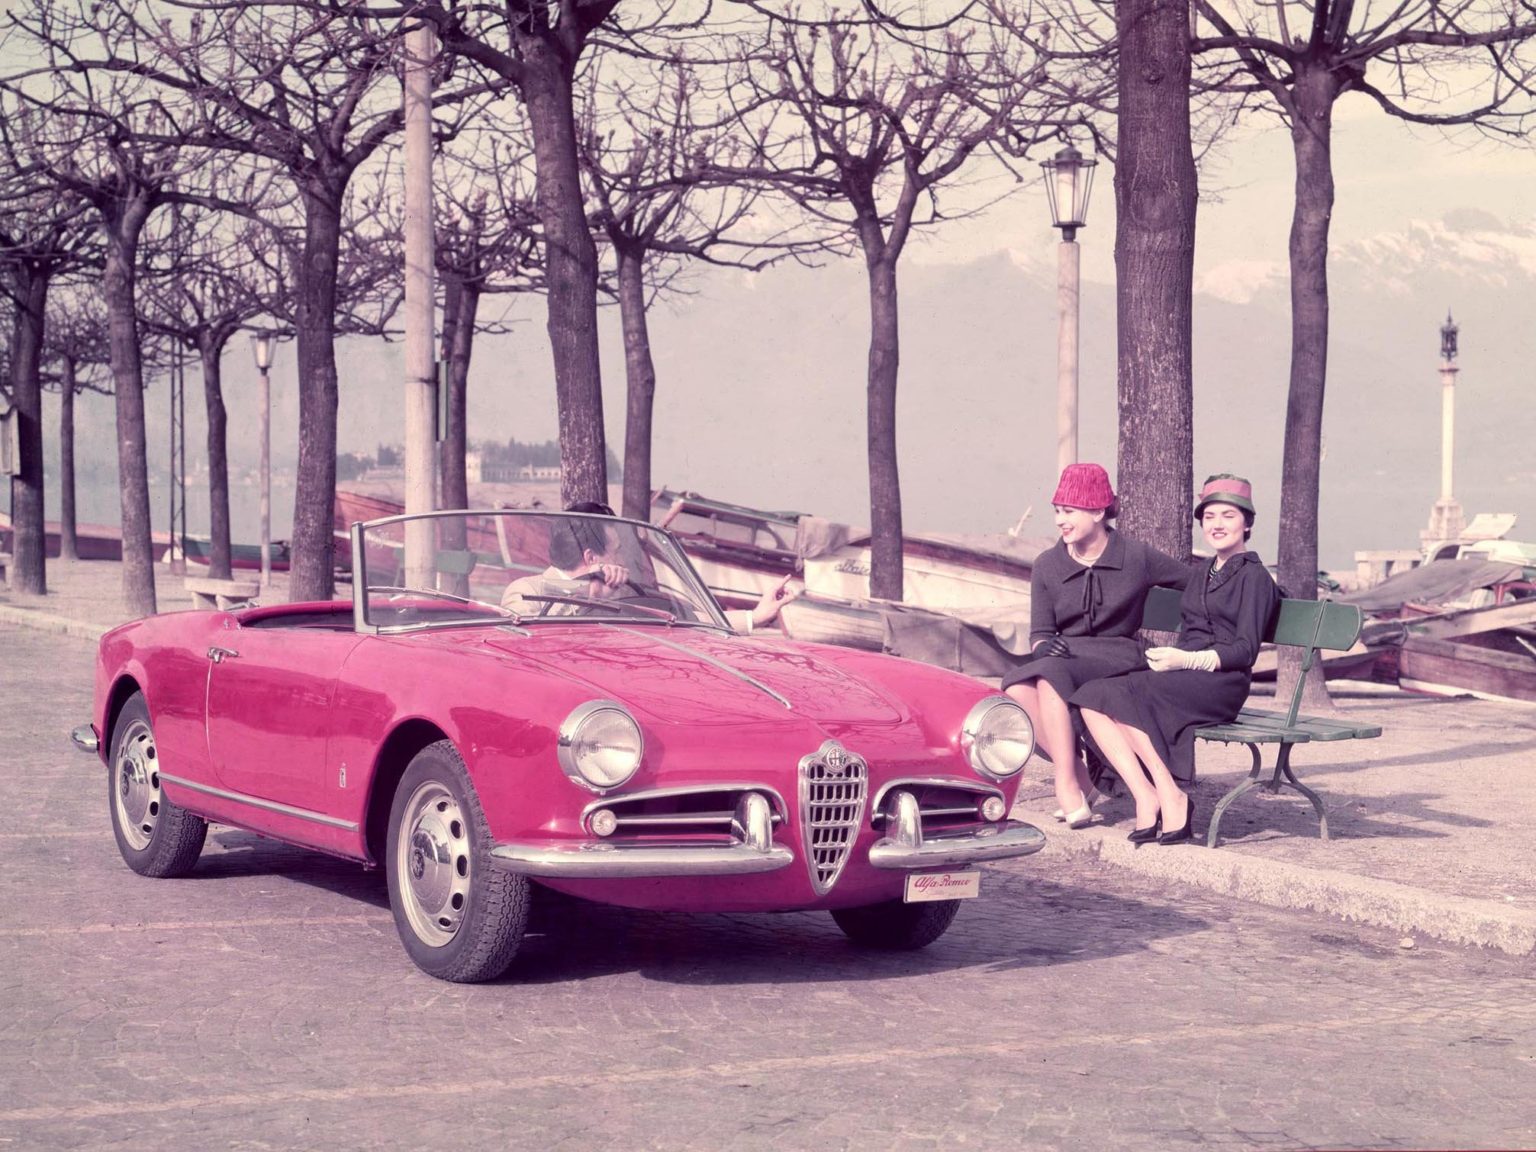 The Alfa Romeo 1660 Spider was launched in the U.S. in 1966.